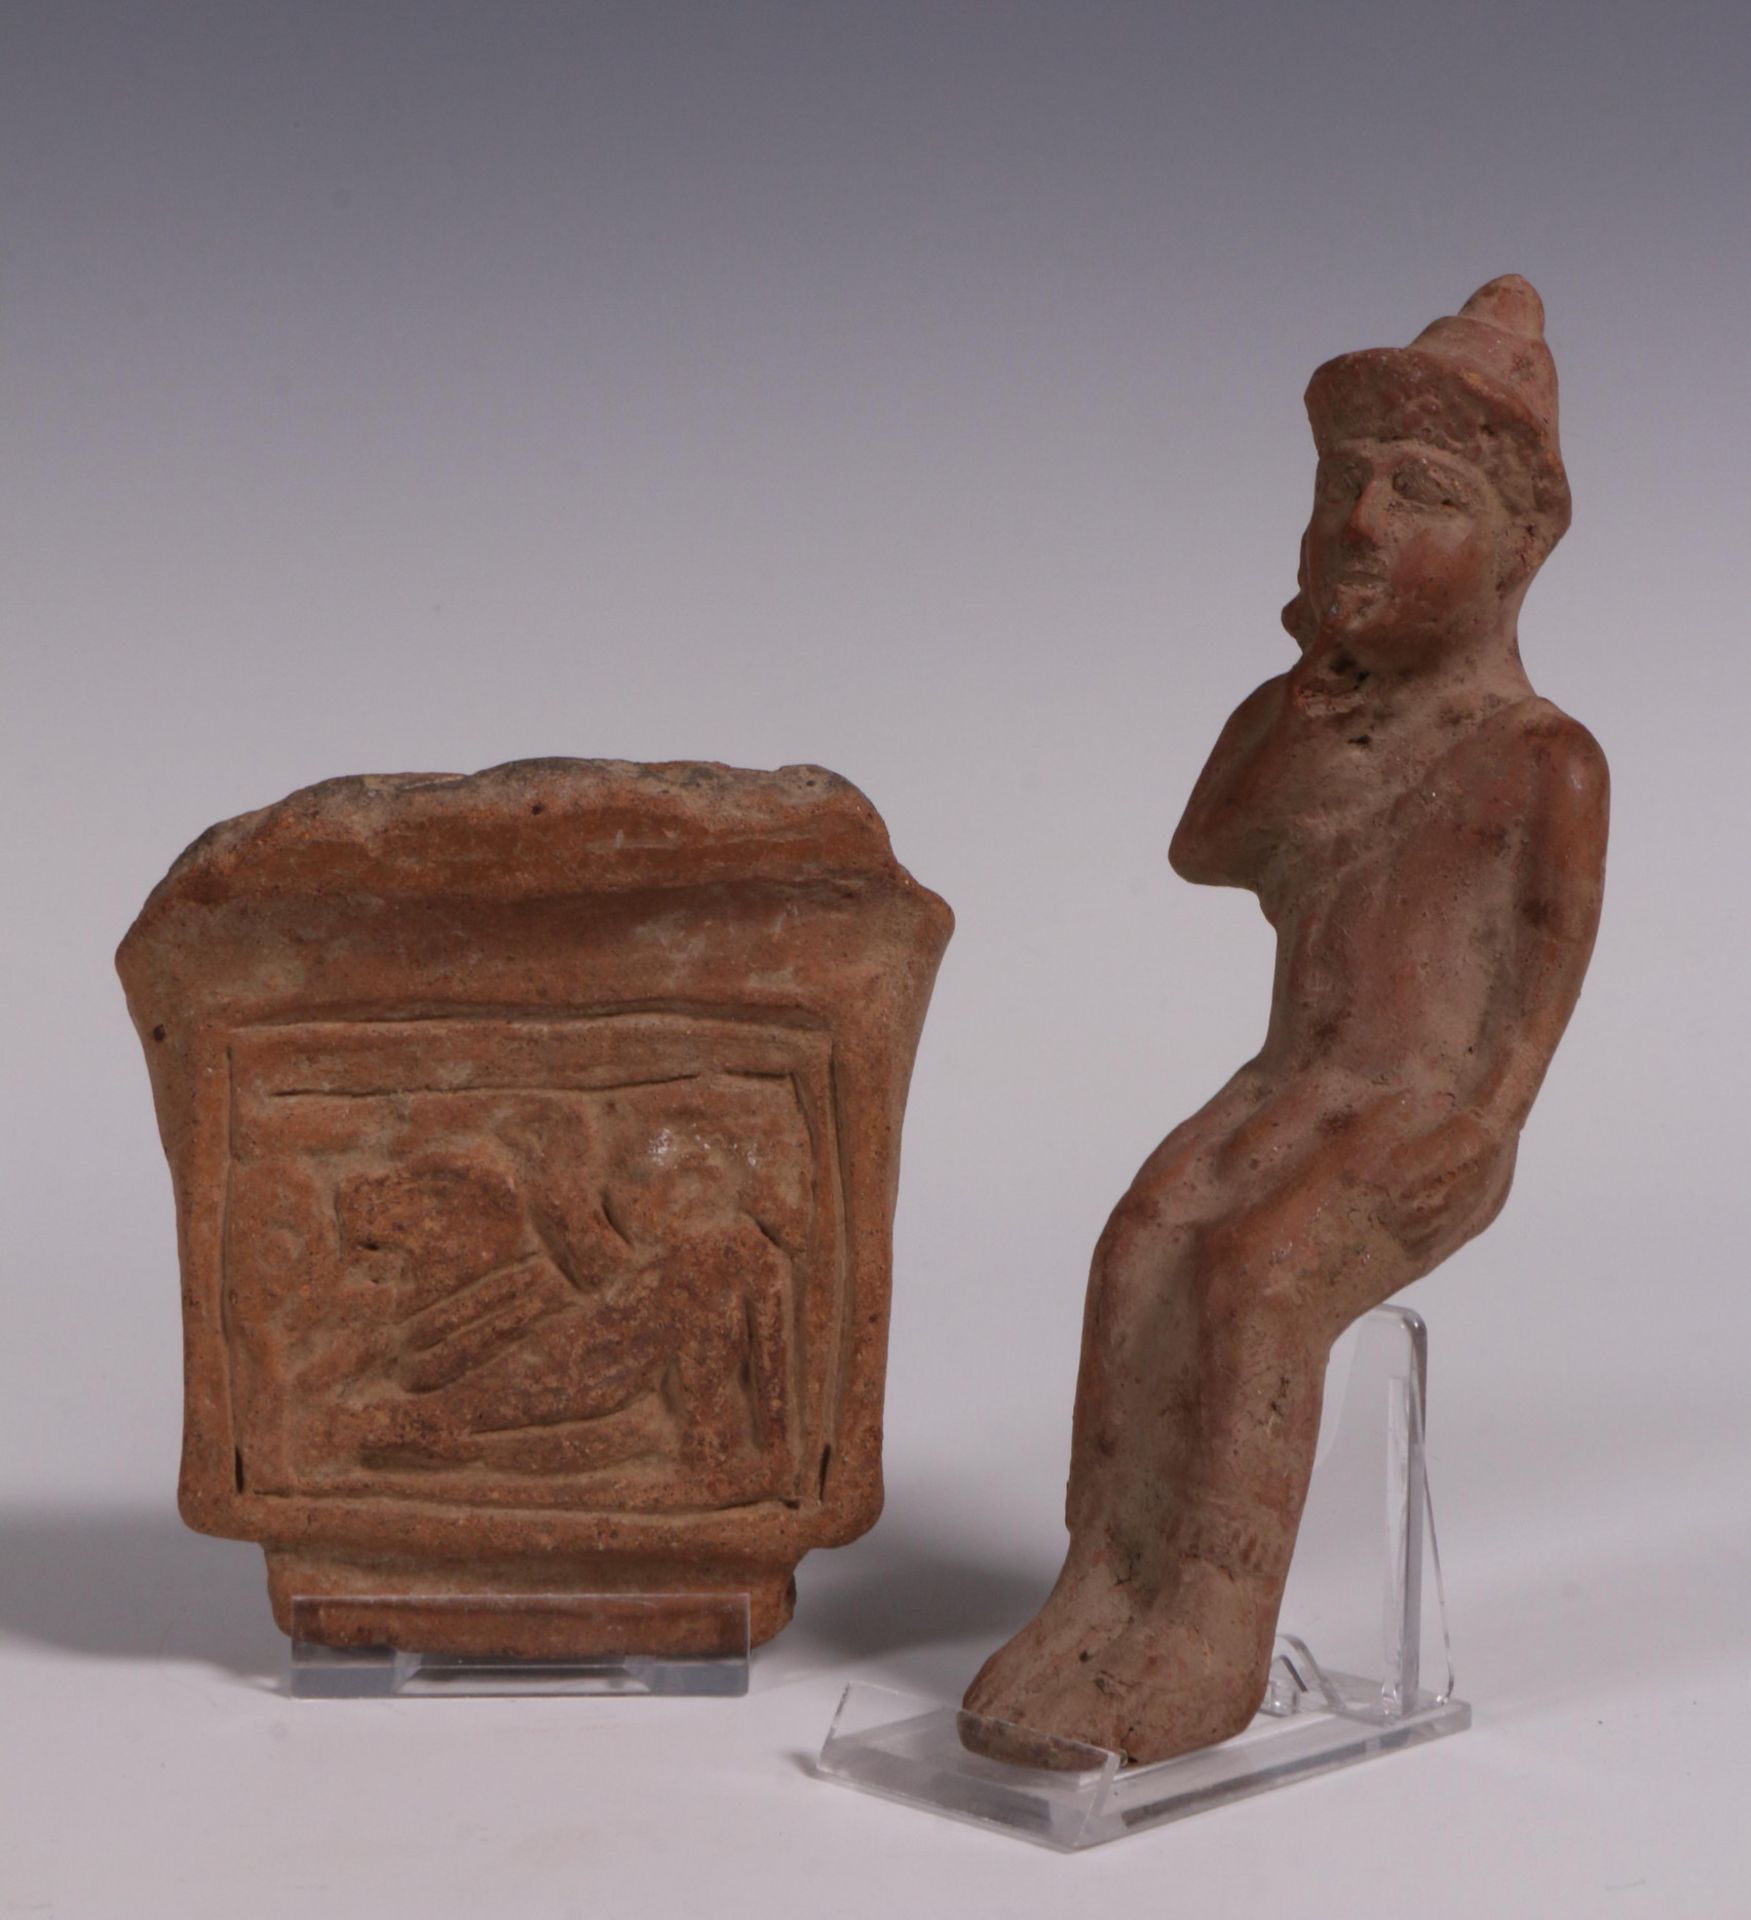 Antique terracotta fragment with relief decoration of a dog and an seated figure, possibly Greek.